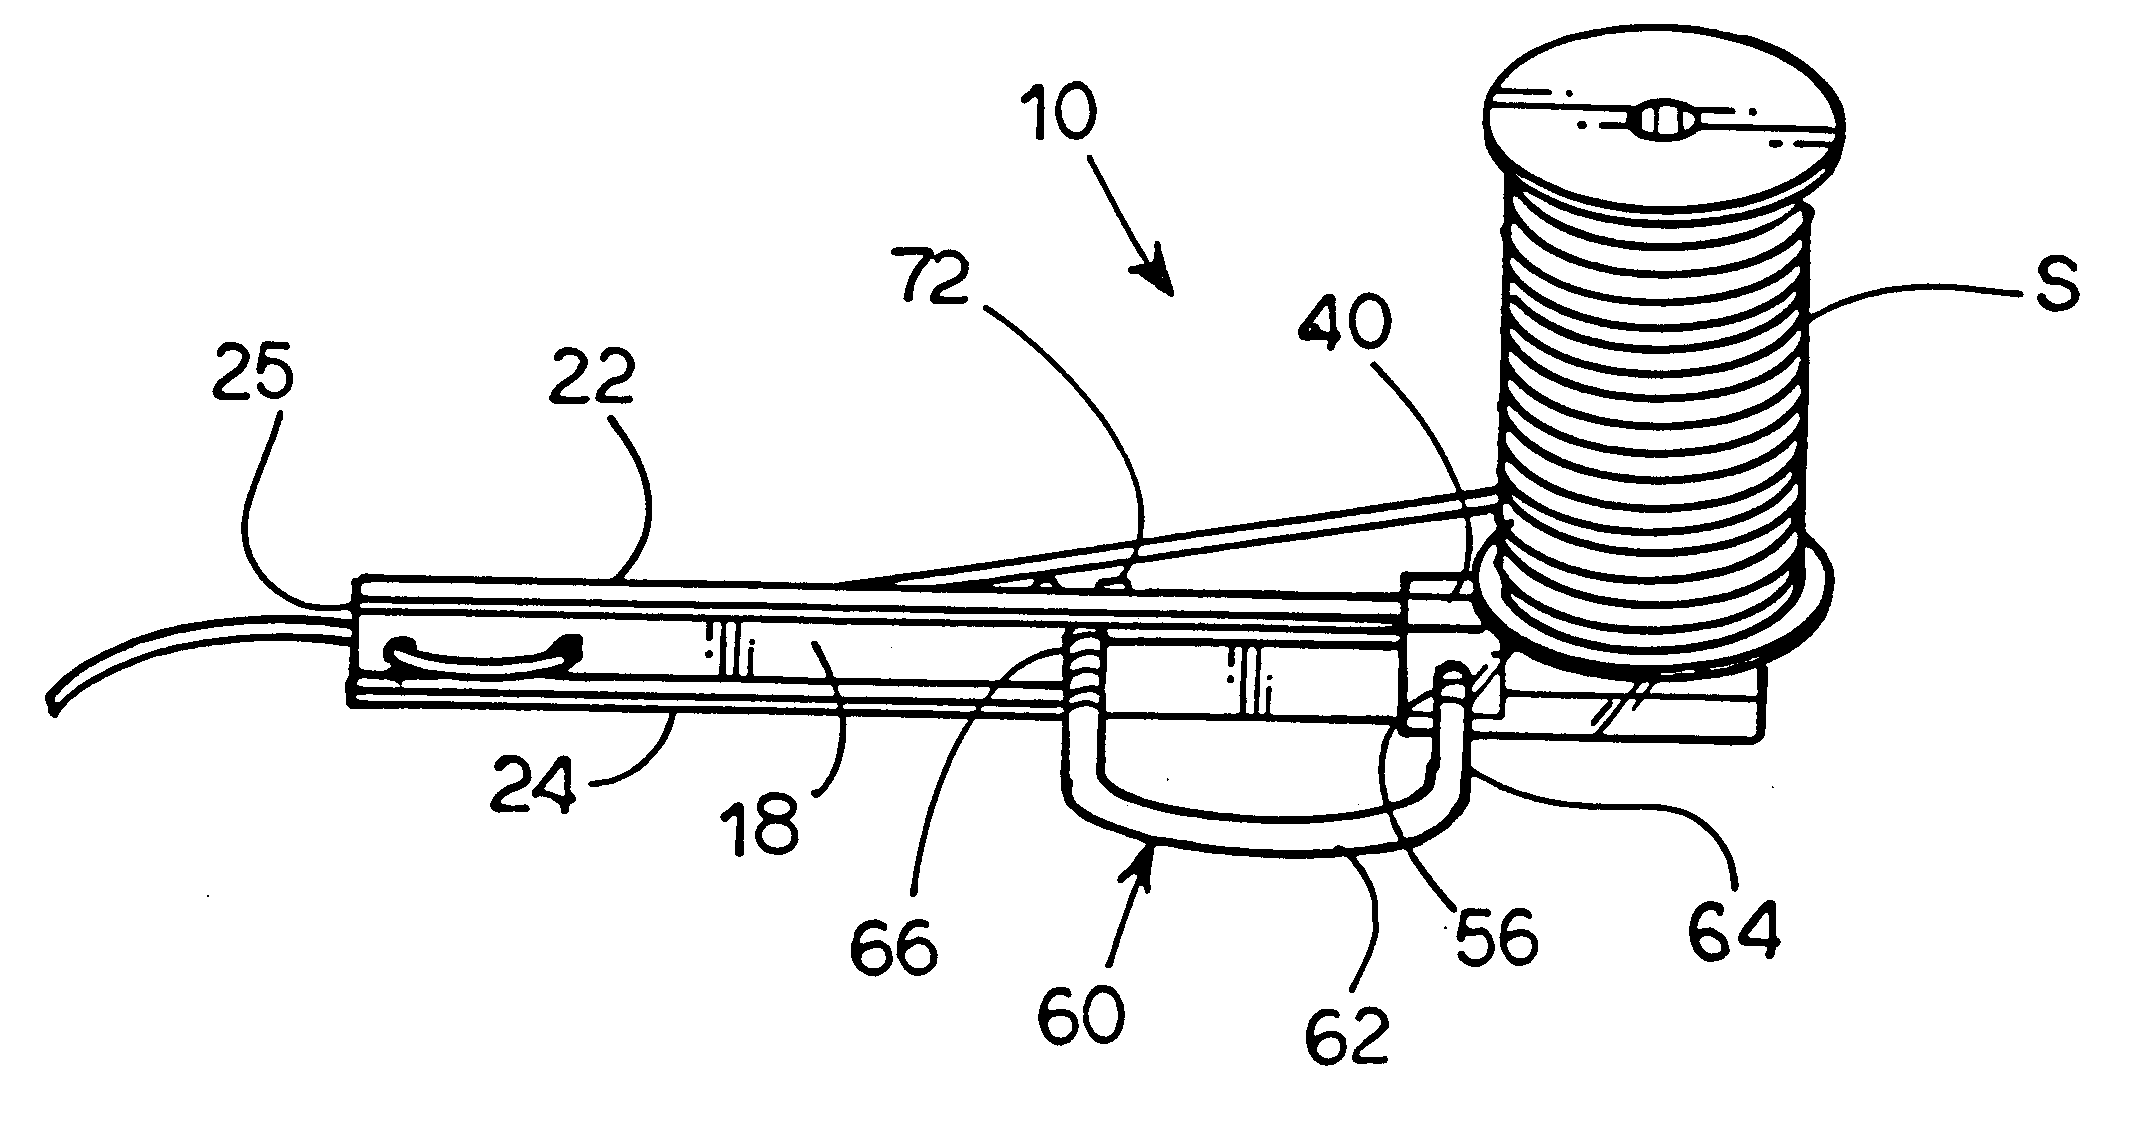 Unit for tying a balloon and securing a ribbon to the balloon